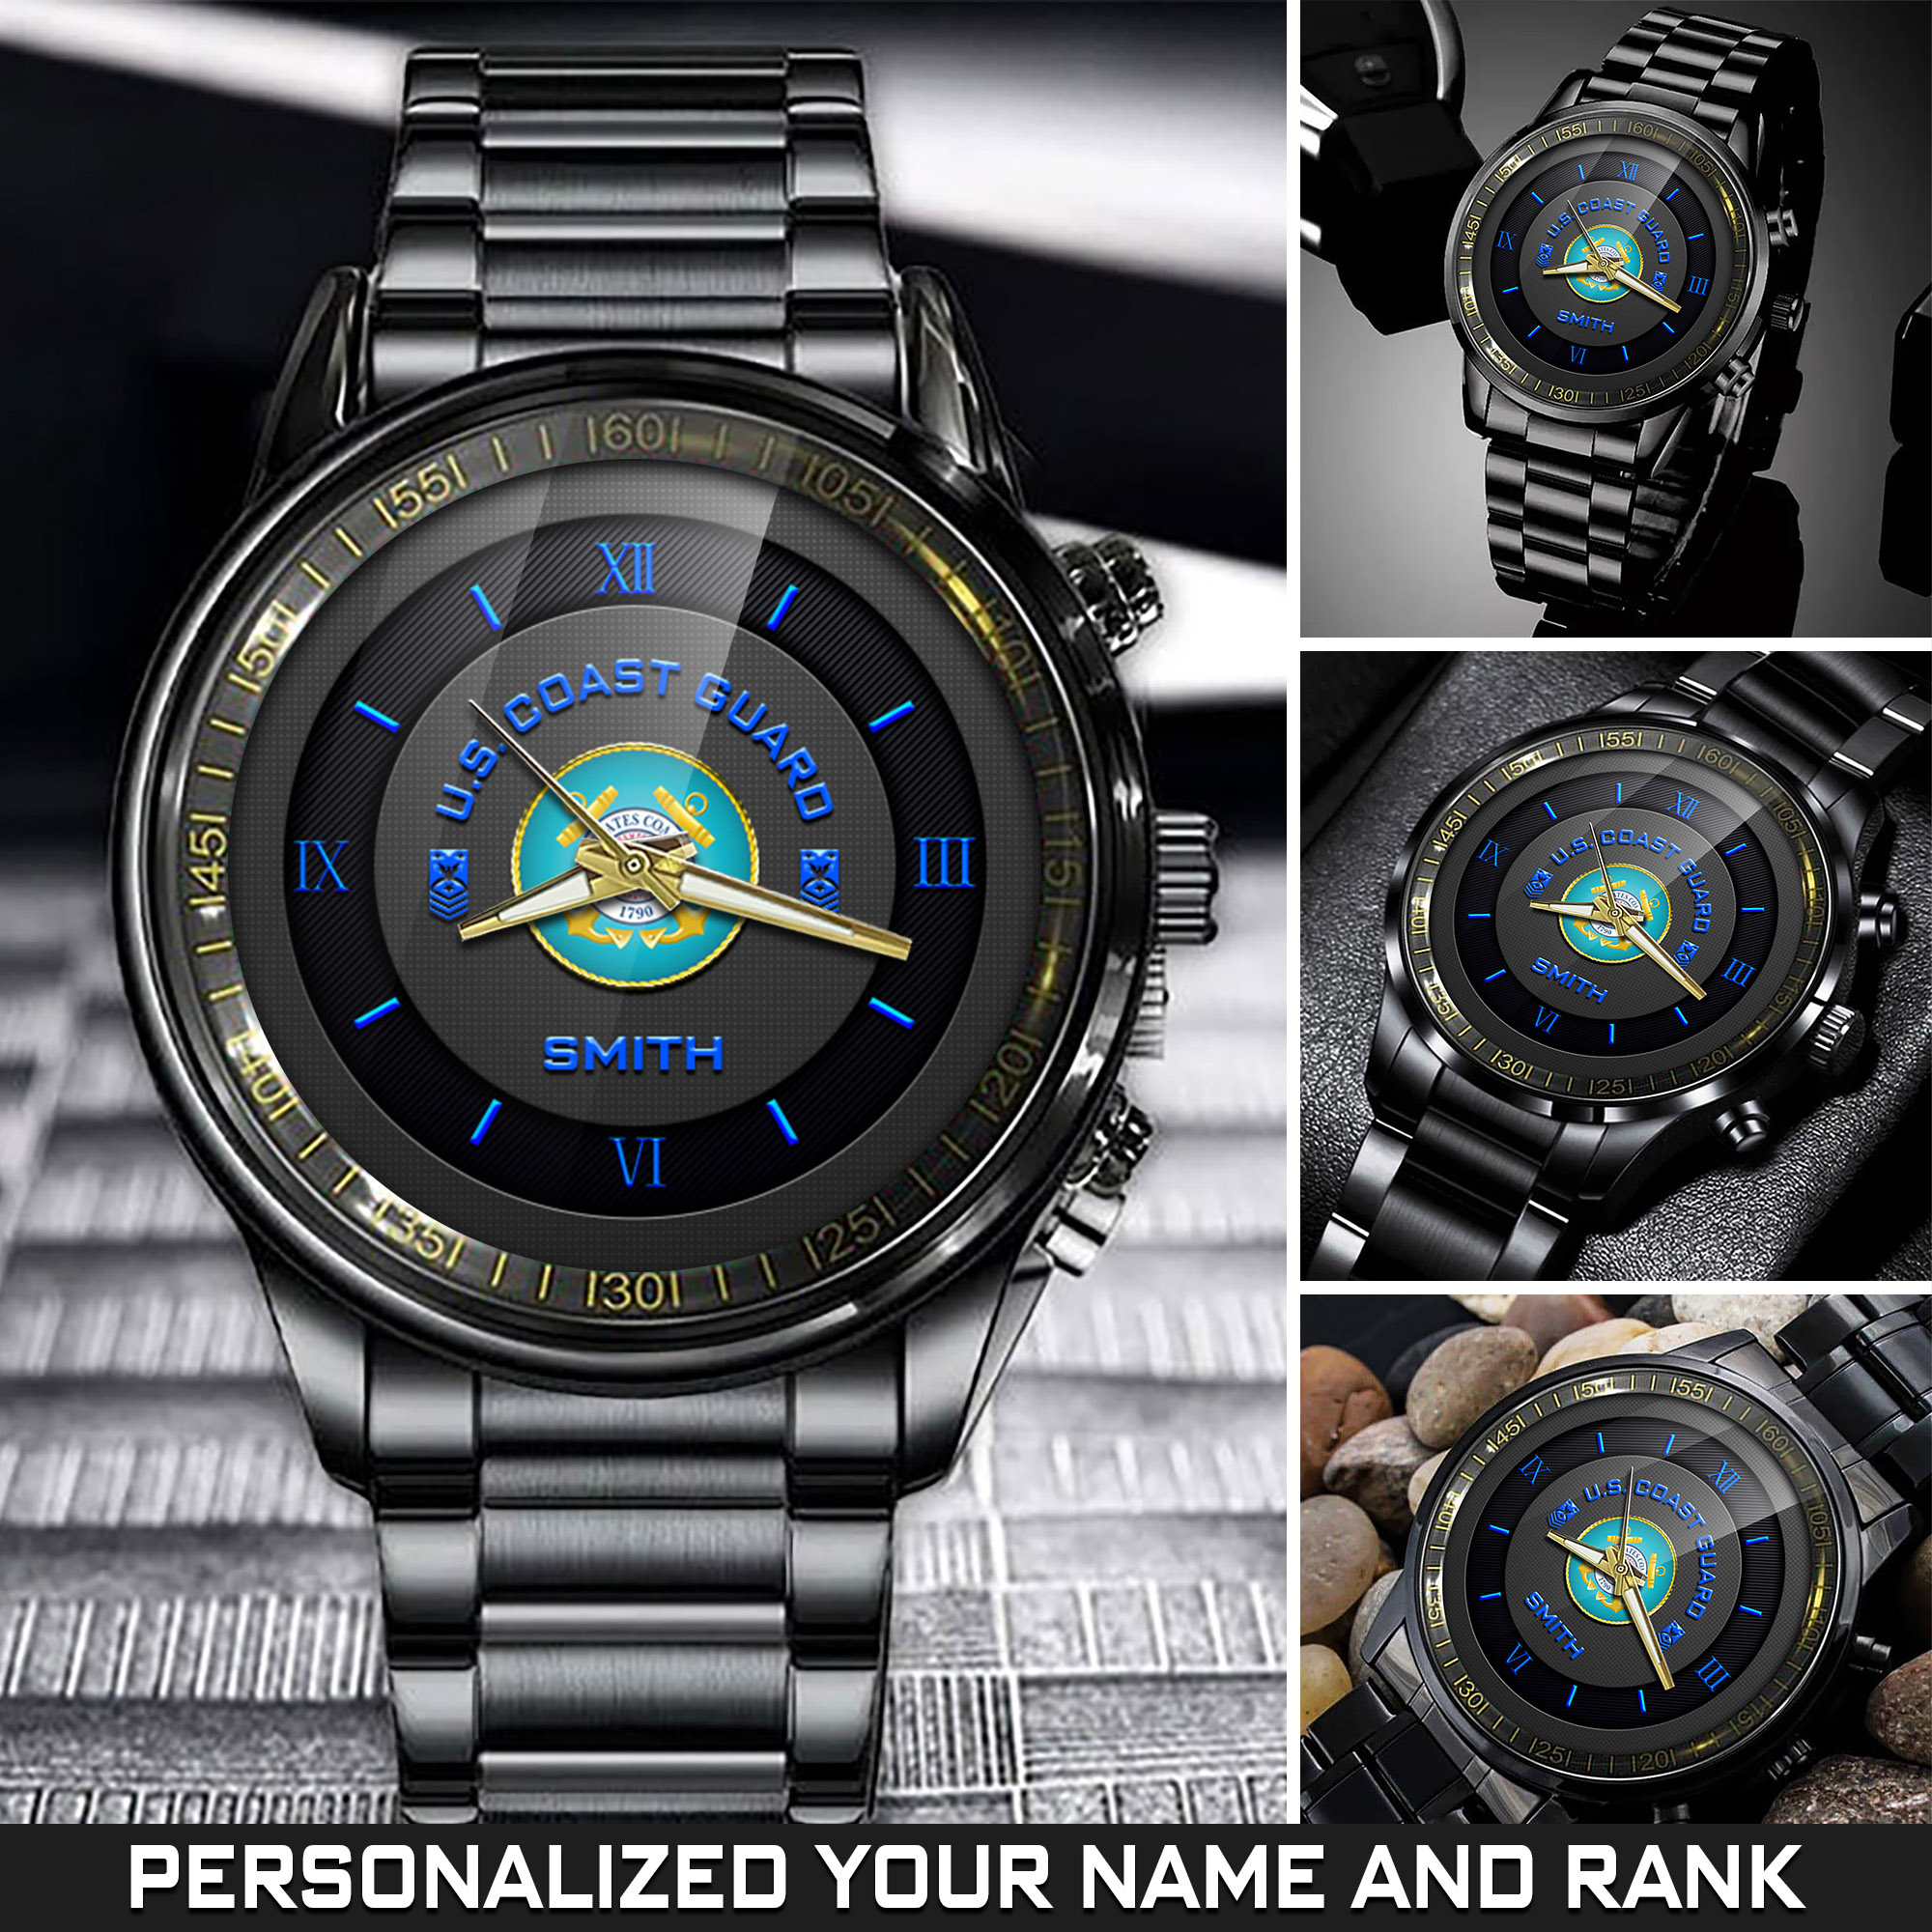 Personalized U.S. Coast Guard Black Fashion Watch With Your Name And Rank, Military Watches, Coast Guard Watches For Men, Veterans Gifts, Gift For Soldier